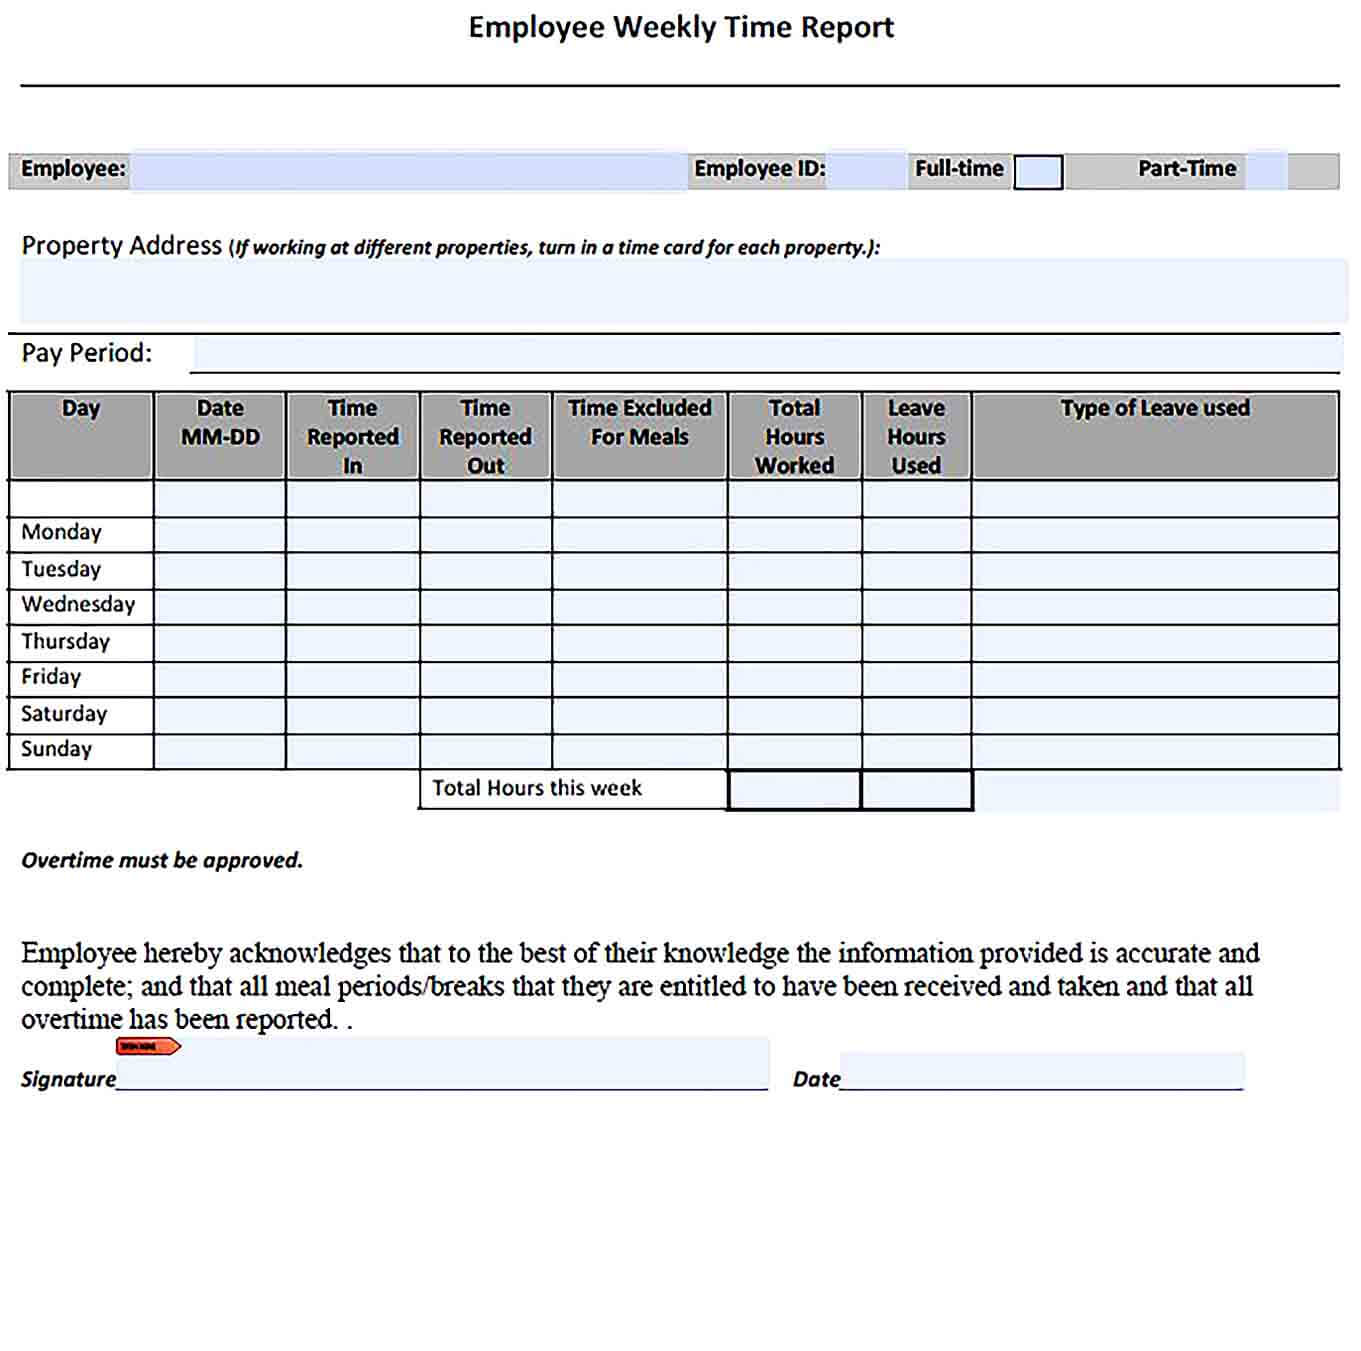 Sample Employee Weekly Time Report